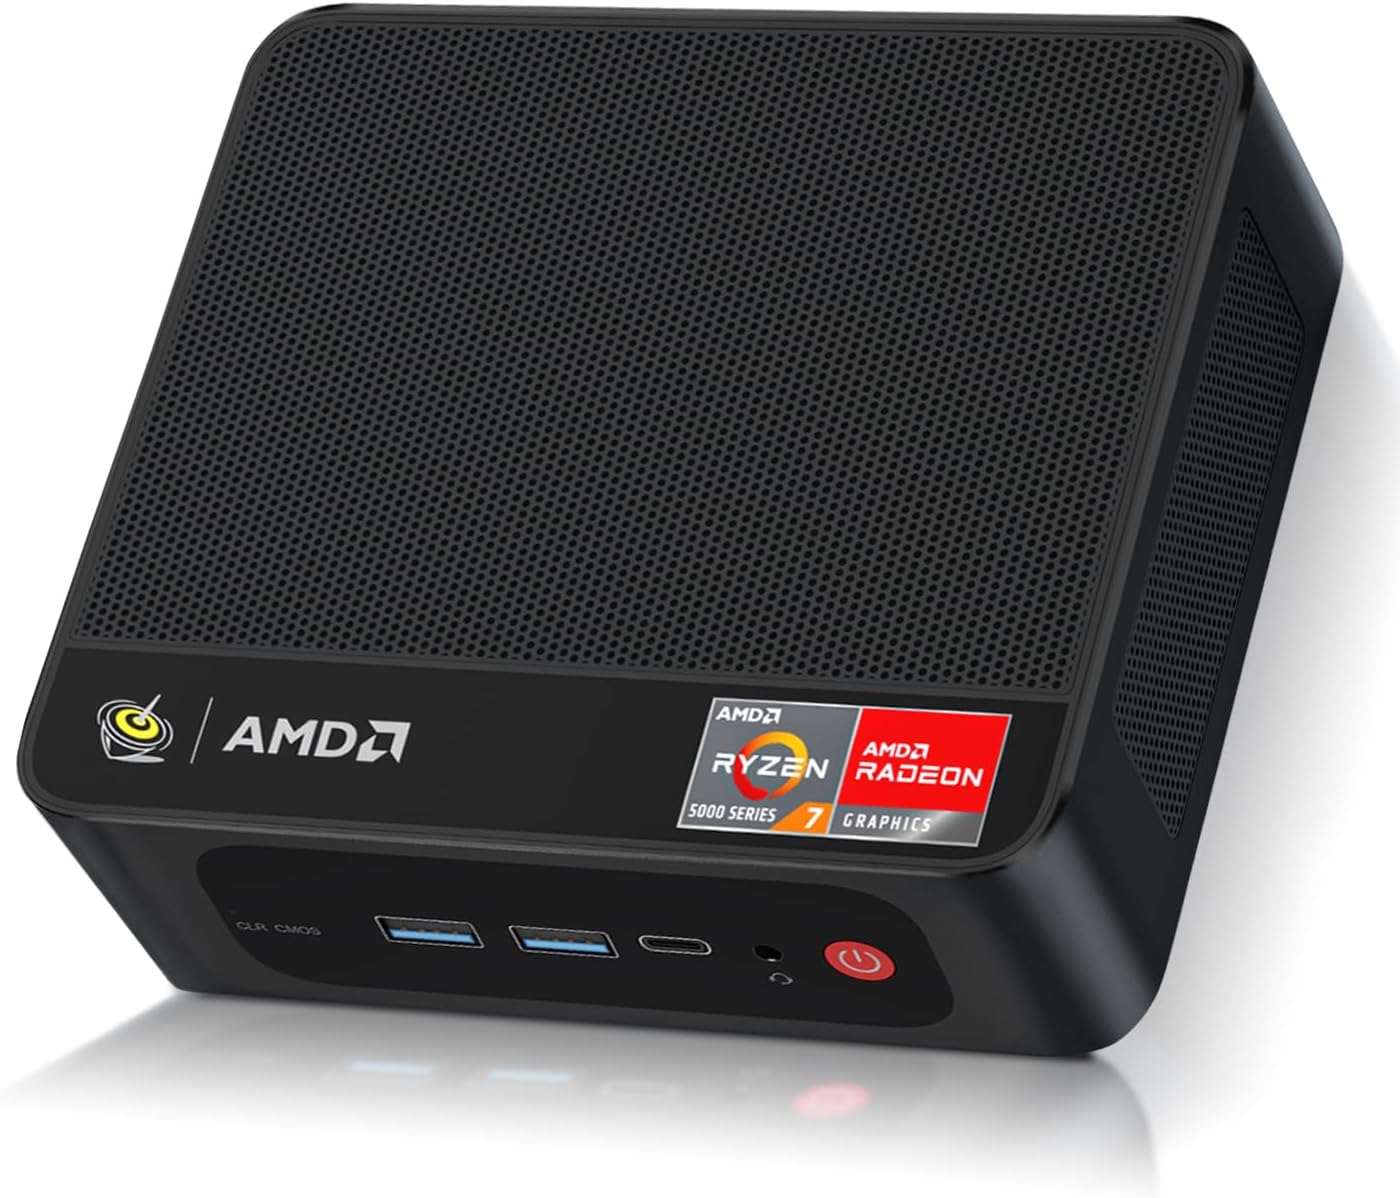 Beelink SER5 Mini PC,AMD Ryzen 5 5560U(6C/12T, Up to 4.0GHz)，16GB DDR4 RAM 500GB SSD Graphics 6 core 1600 MHz,Mini Computer Support 4K@60Hz Output/WiFi6/BT5.2/Office/Home/Gaming,Auto Power On